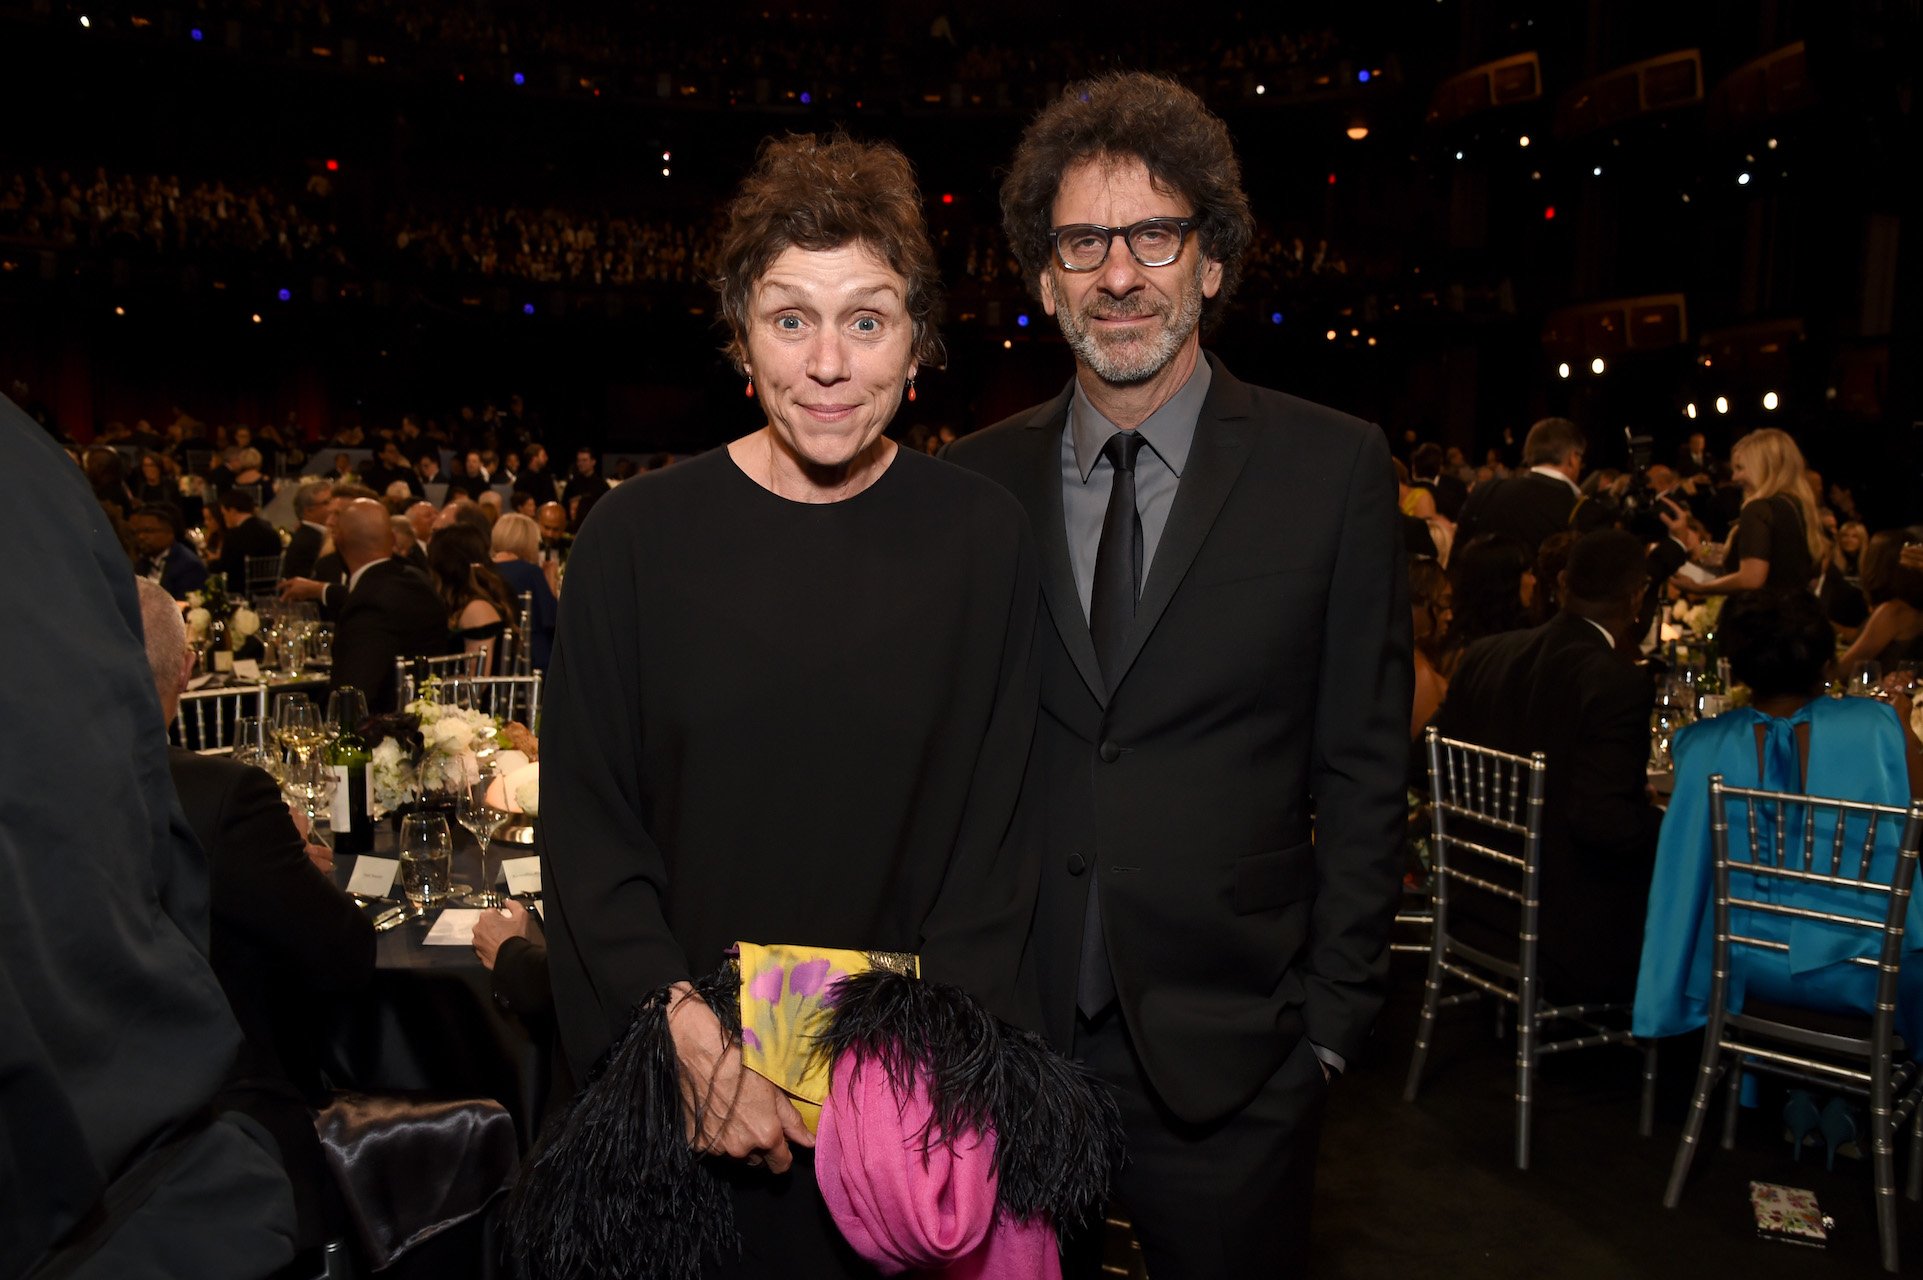 (L-R) Frances McDormand and husband Joel Coen standing together and looking at the camera